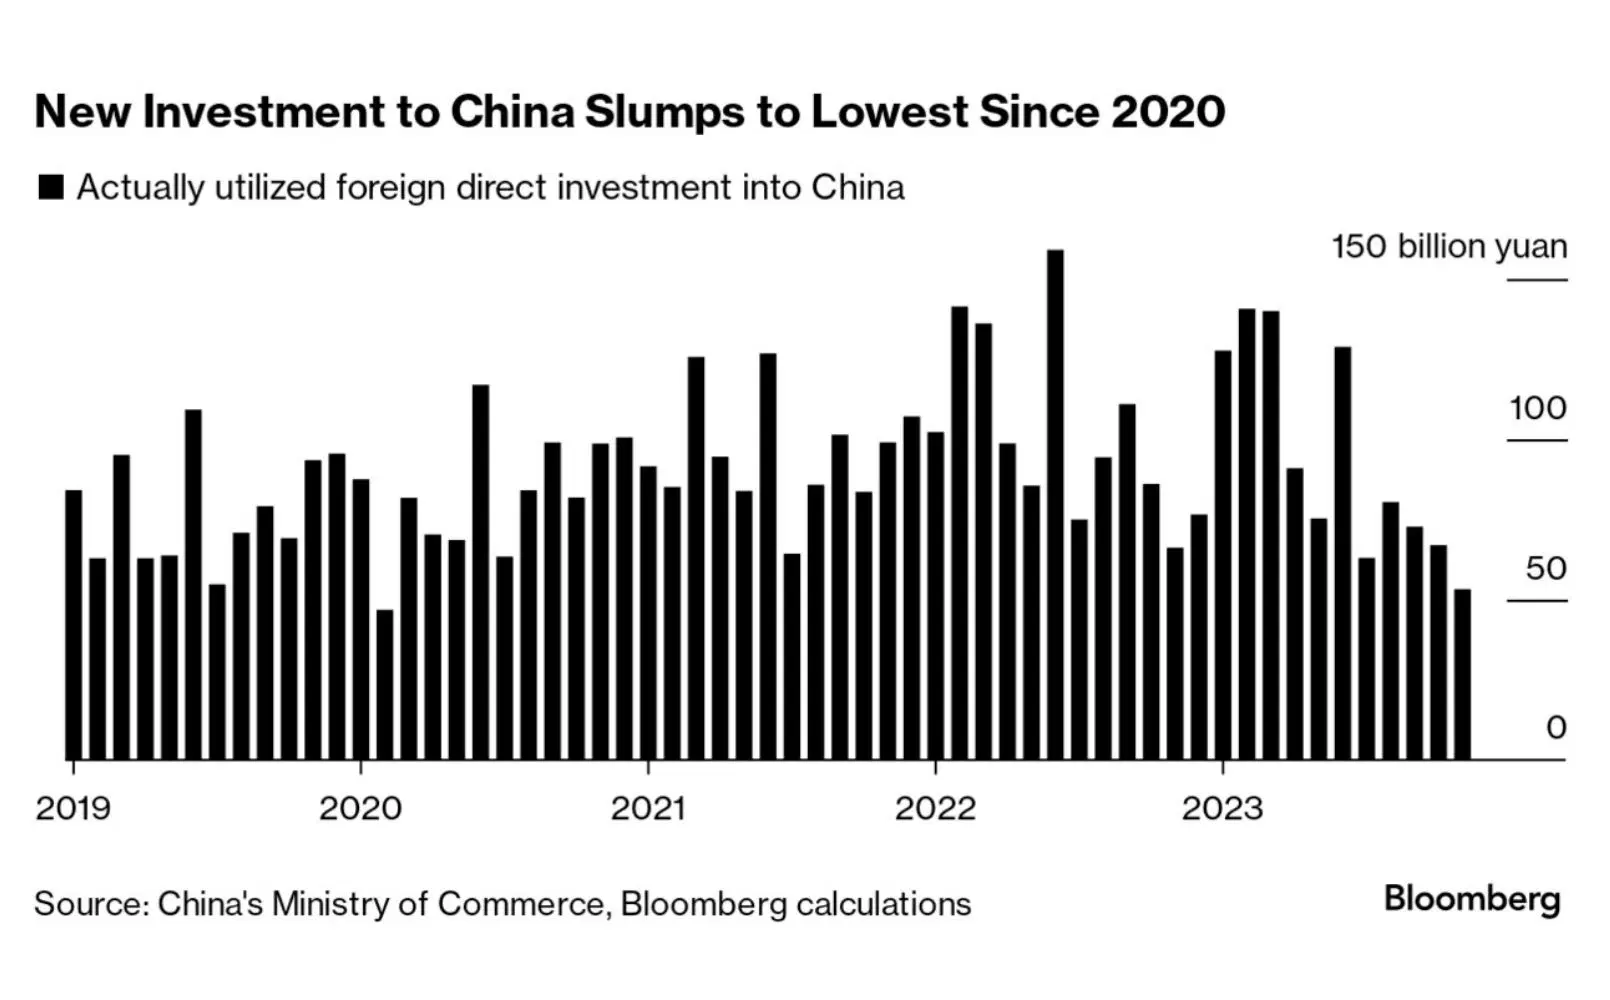 New Investment To China Slumps To Lowest Since 2020